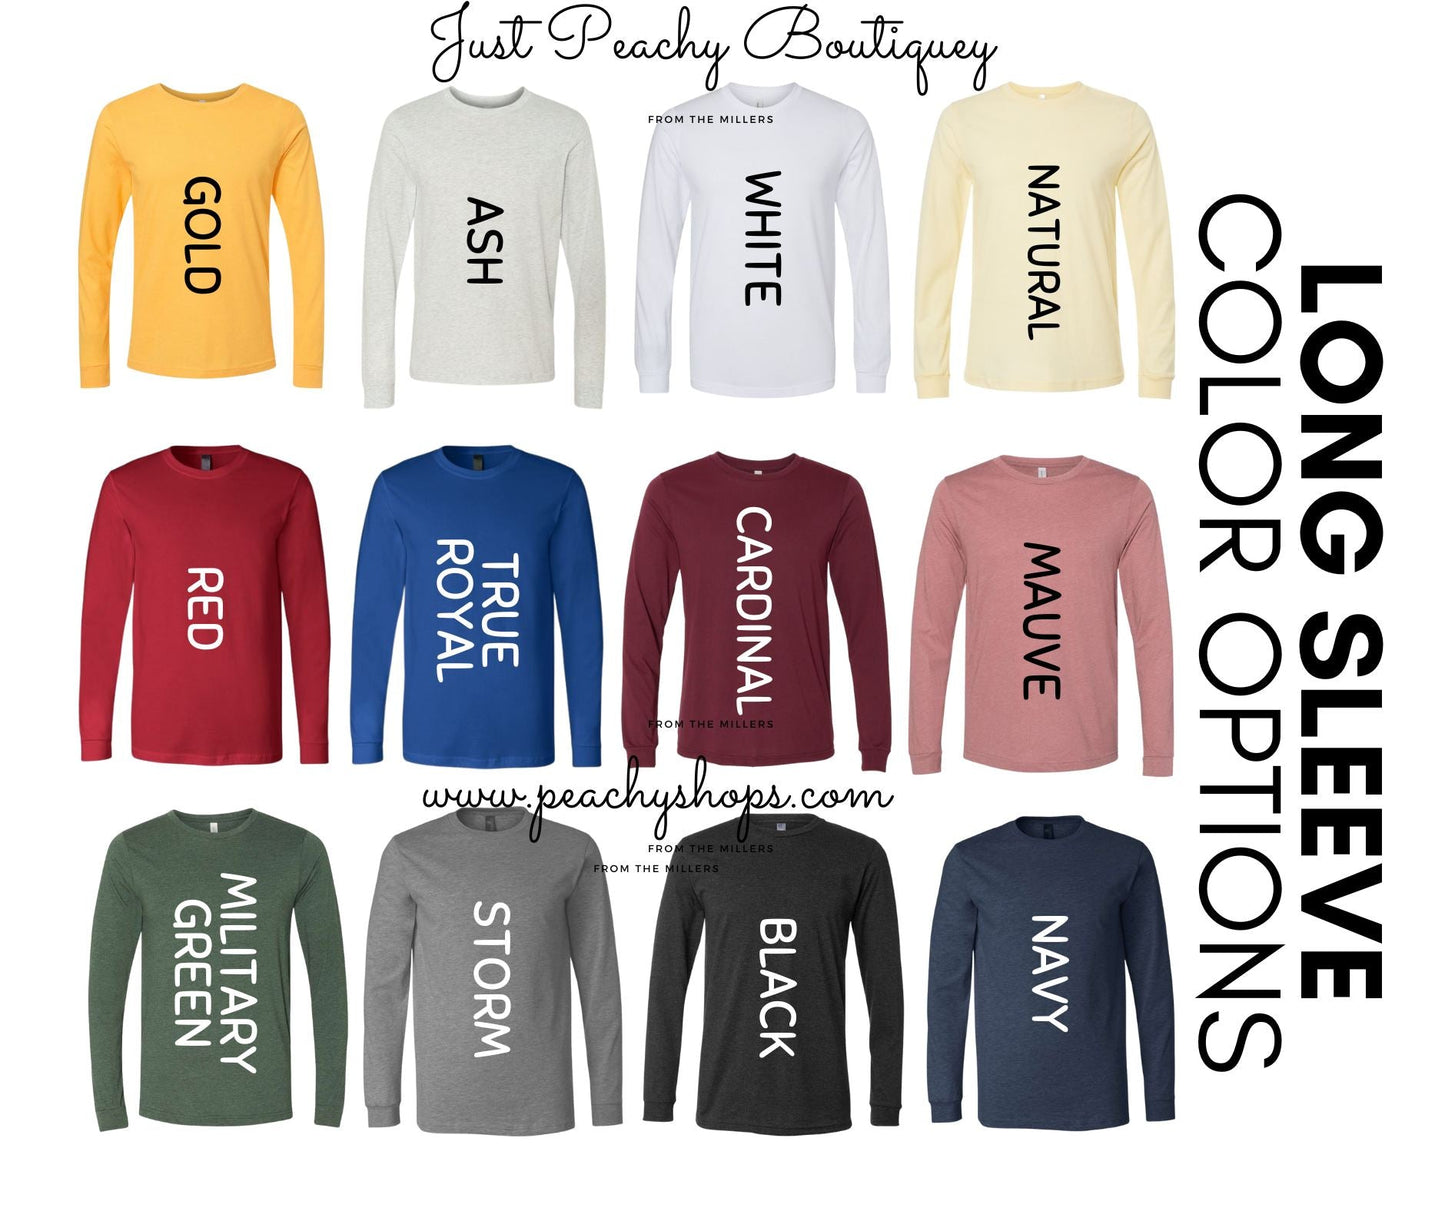 IN MY BOY MOM ERA T-SHIRT OR PICK FROM 200 COLOR & STYLE OPTIONS! - TAT 4-7 DAYS